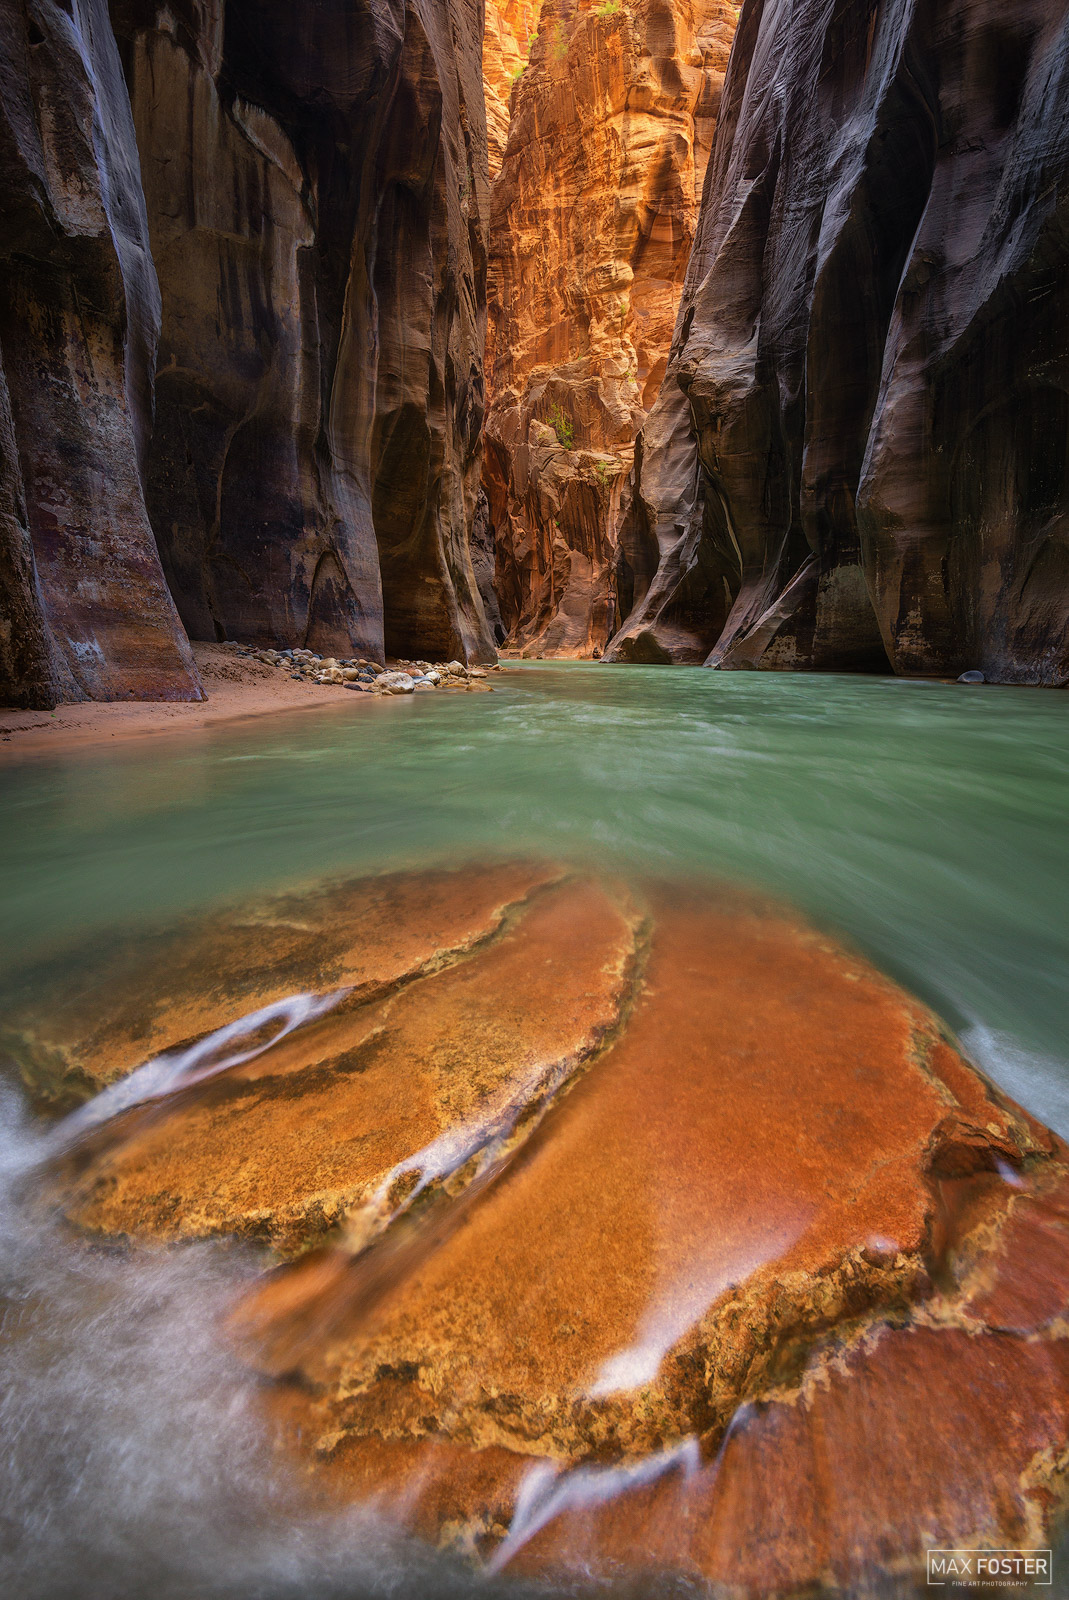 Breathe new life into your home with Awestruck, Max Foster's limited edition photography print of The Narrows in Zion National...